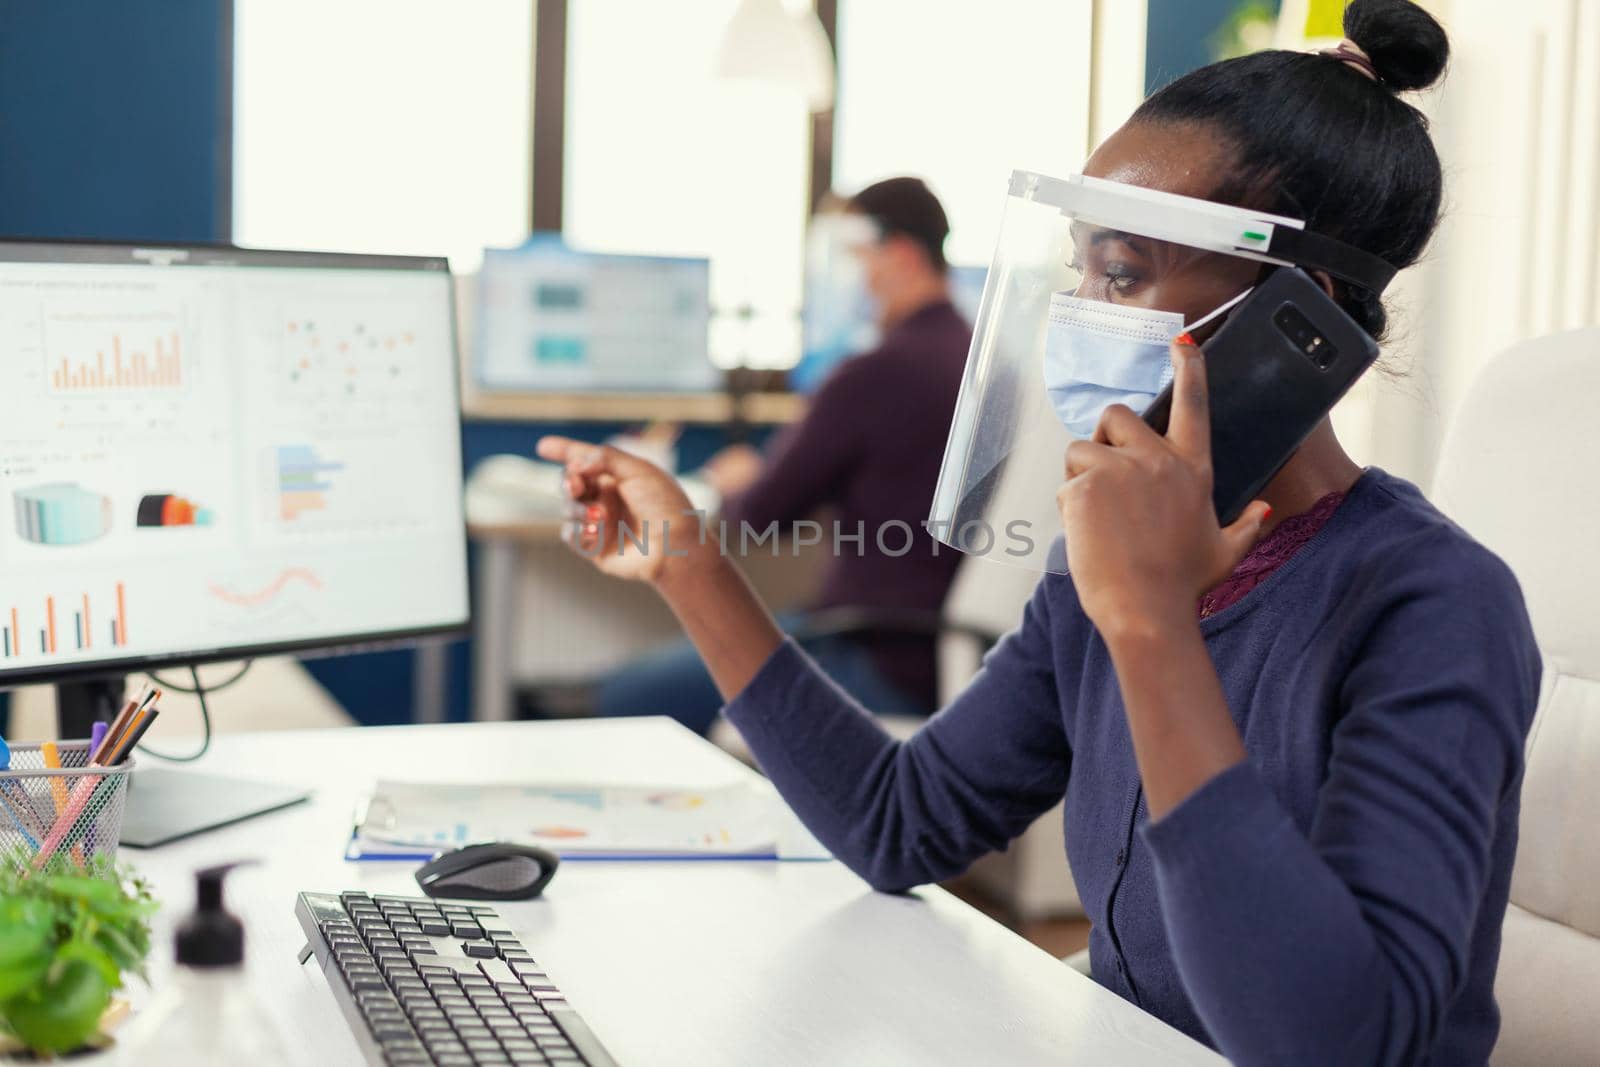 African freelancer discussing on smartphone about financial graphs wearing face mask during coronavirus. Multiethnic coworkers working respecting social distance in financial company.